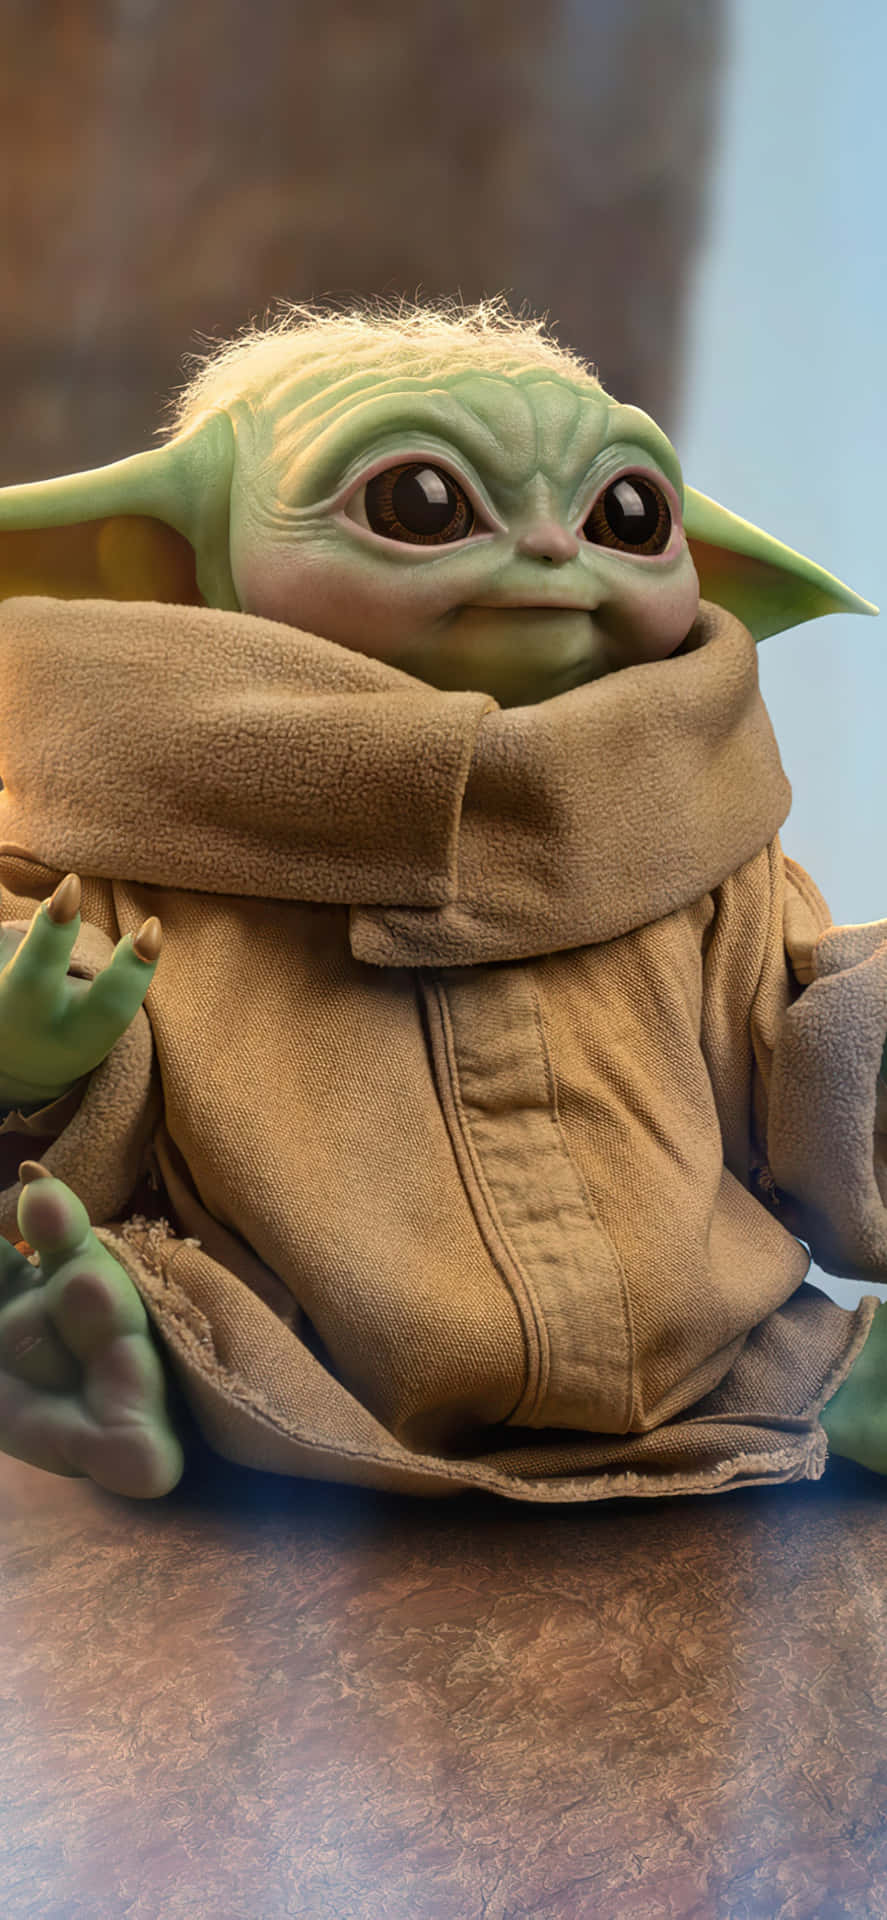 This Baby Yoda phone will bring the force to your pocket Wallpaper